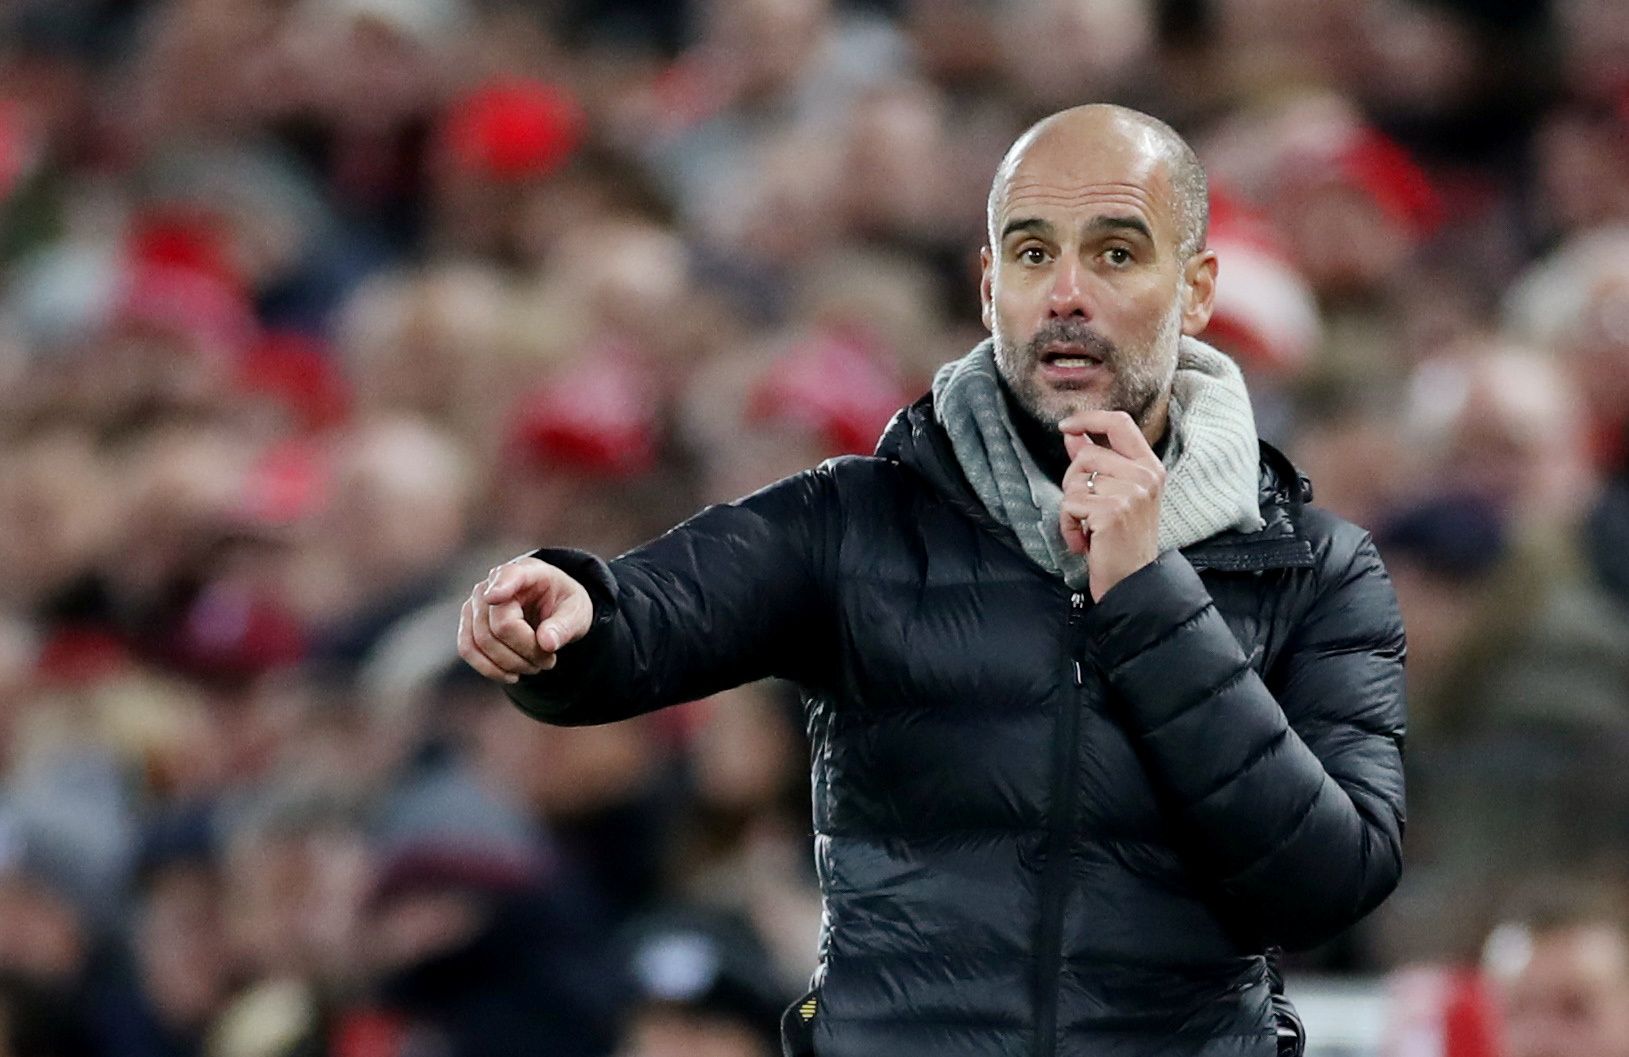 Soccer Football - Premier League - Liverpool v Manchester City - Anfield, Liverpool, Britain - November 10, 2019  Manchester City manager Pep Guardiola   Action Images via Reuters/Carl Recine  EDITORIAL USE ONLY. No use with unauthorized audio, video, data, fixture lists, club/league logos or 